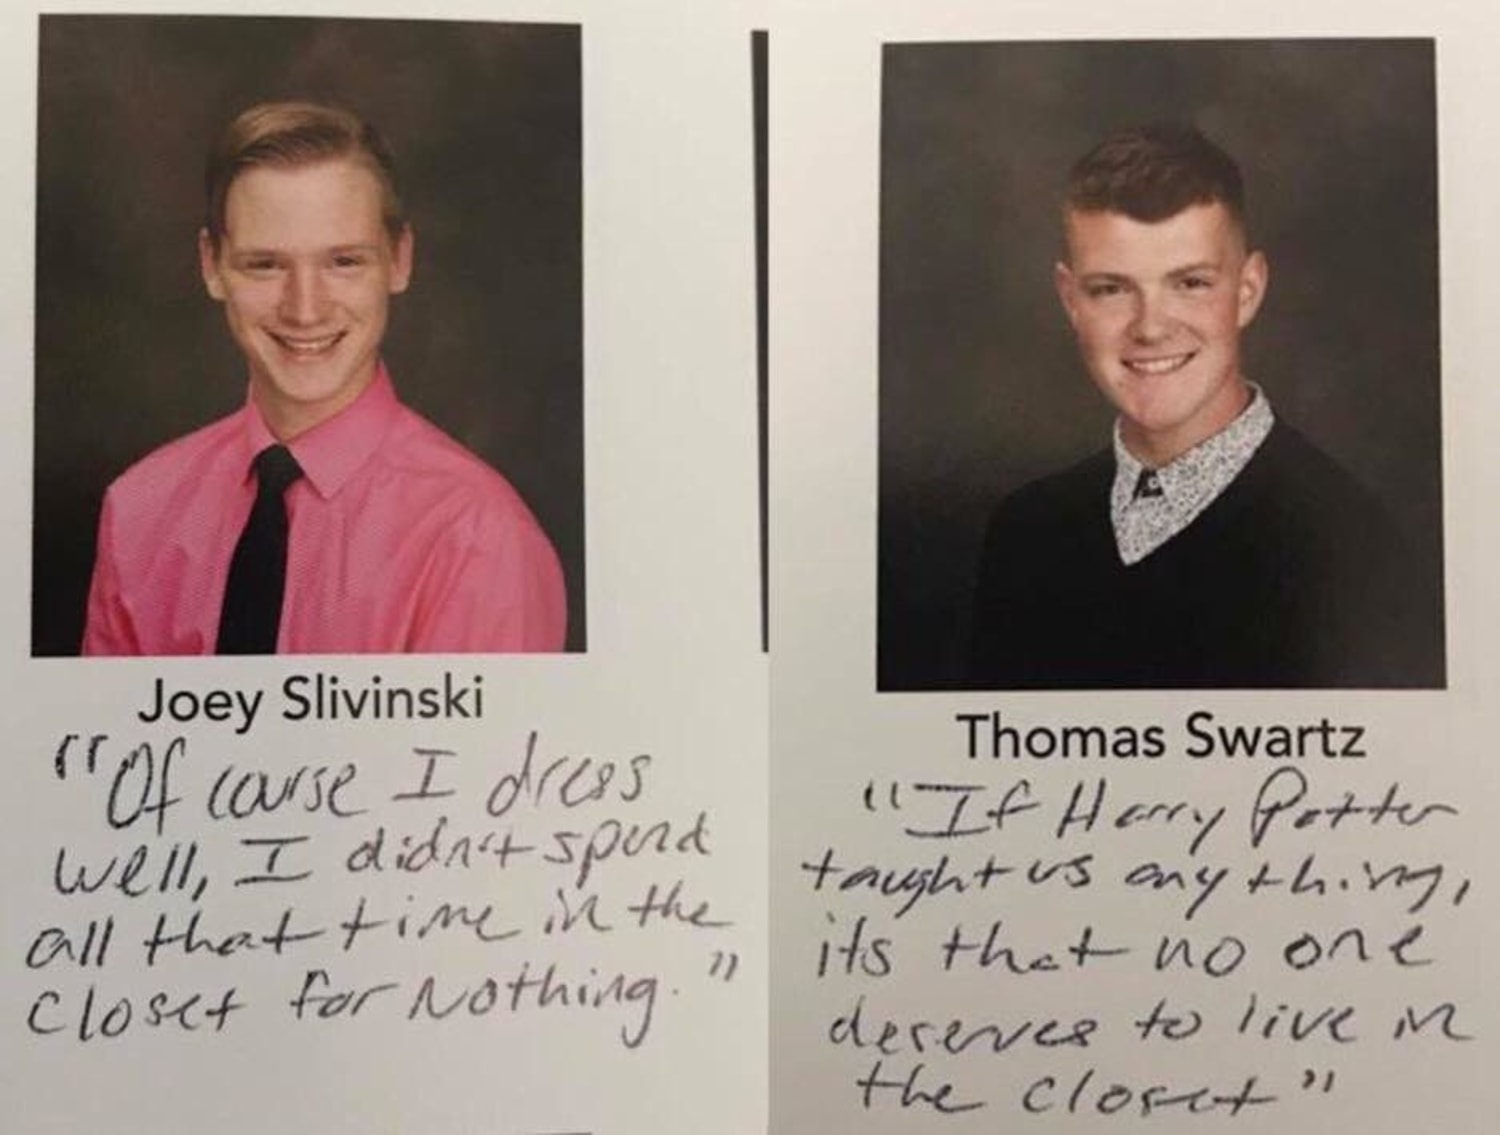 Missouri School District Removes Two Gay Students' Yearbook Quotes